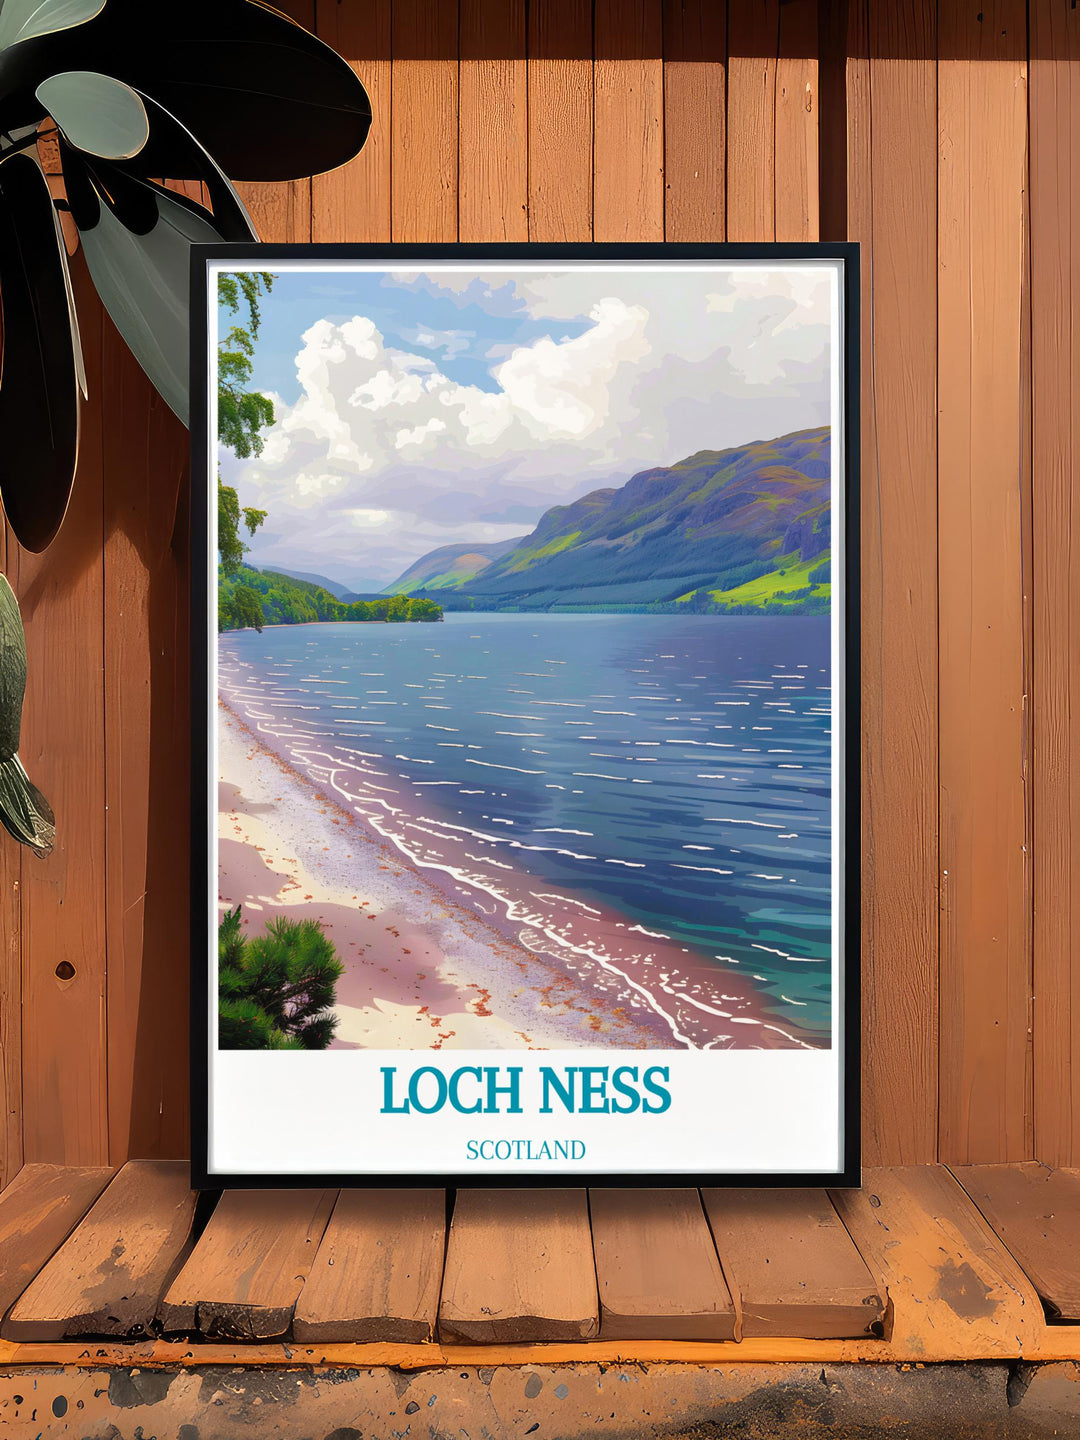 Custom print of Loch Ness, allowing for personalized elements to capture the unique essence of this famous location.